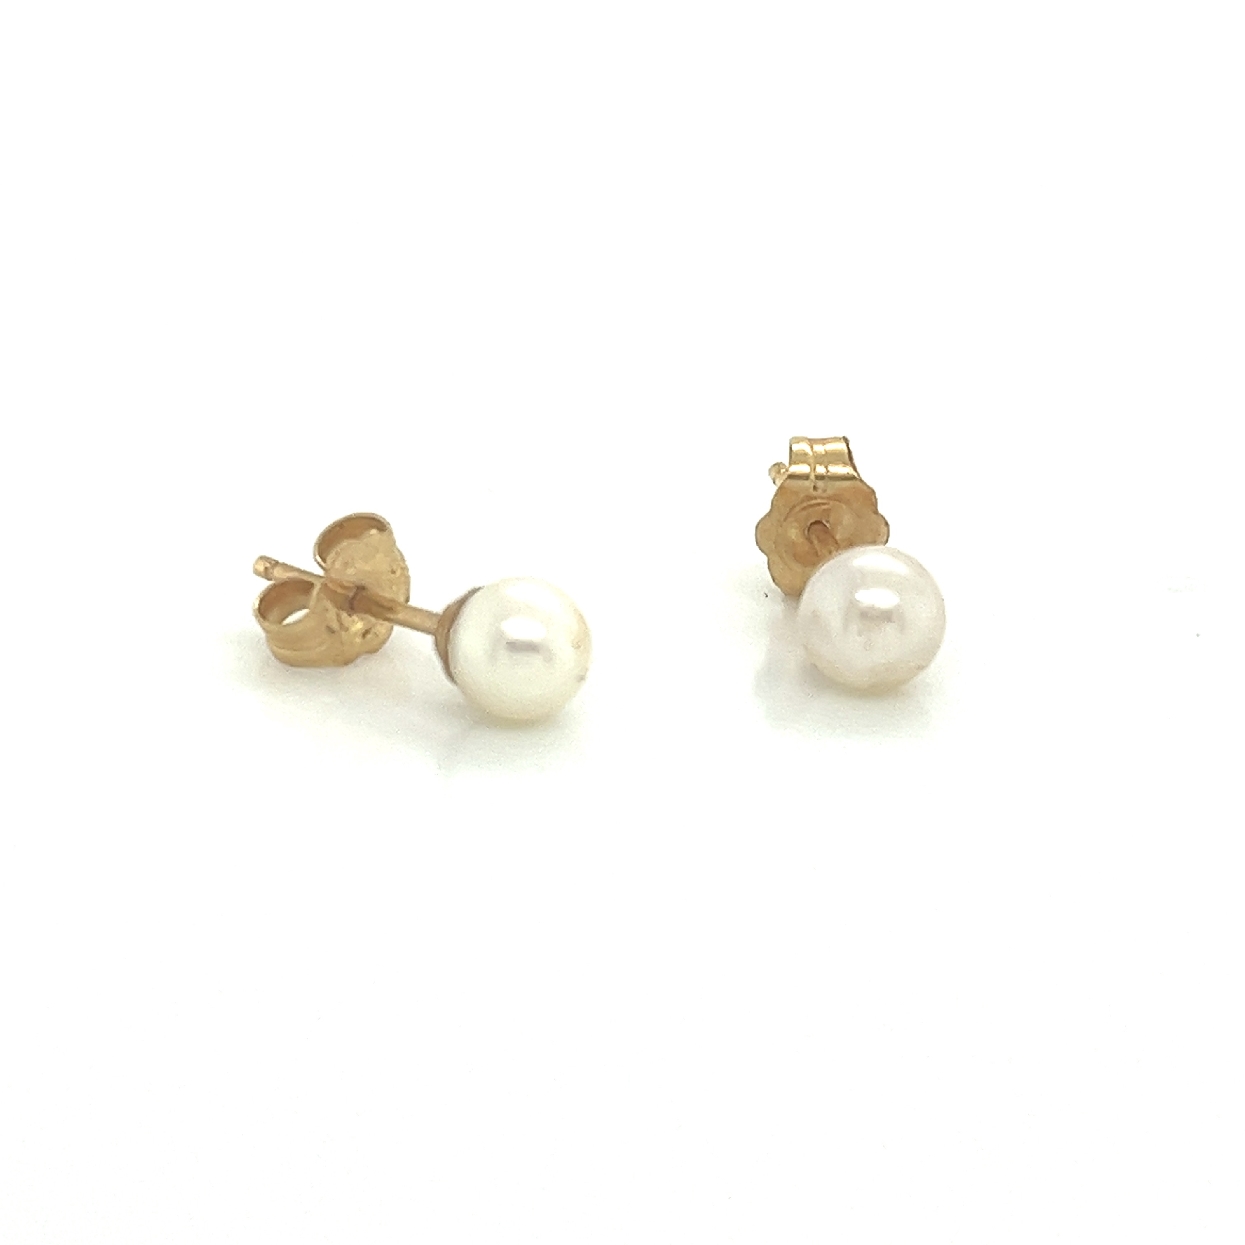 14K Yellow Gold 4.85MM
Small Pearl Studs
